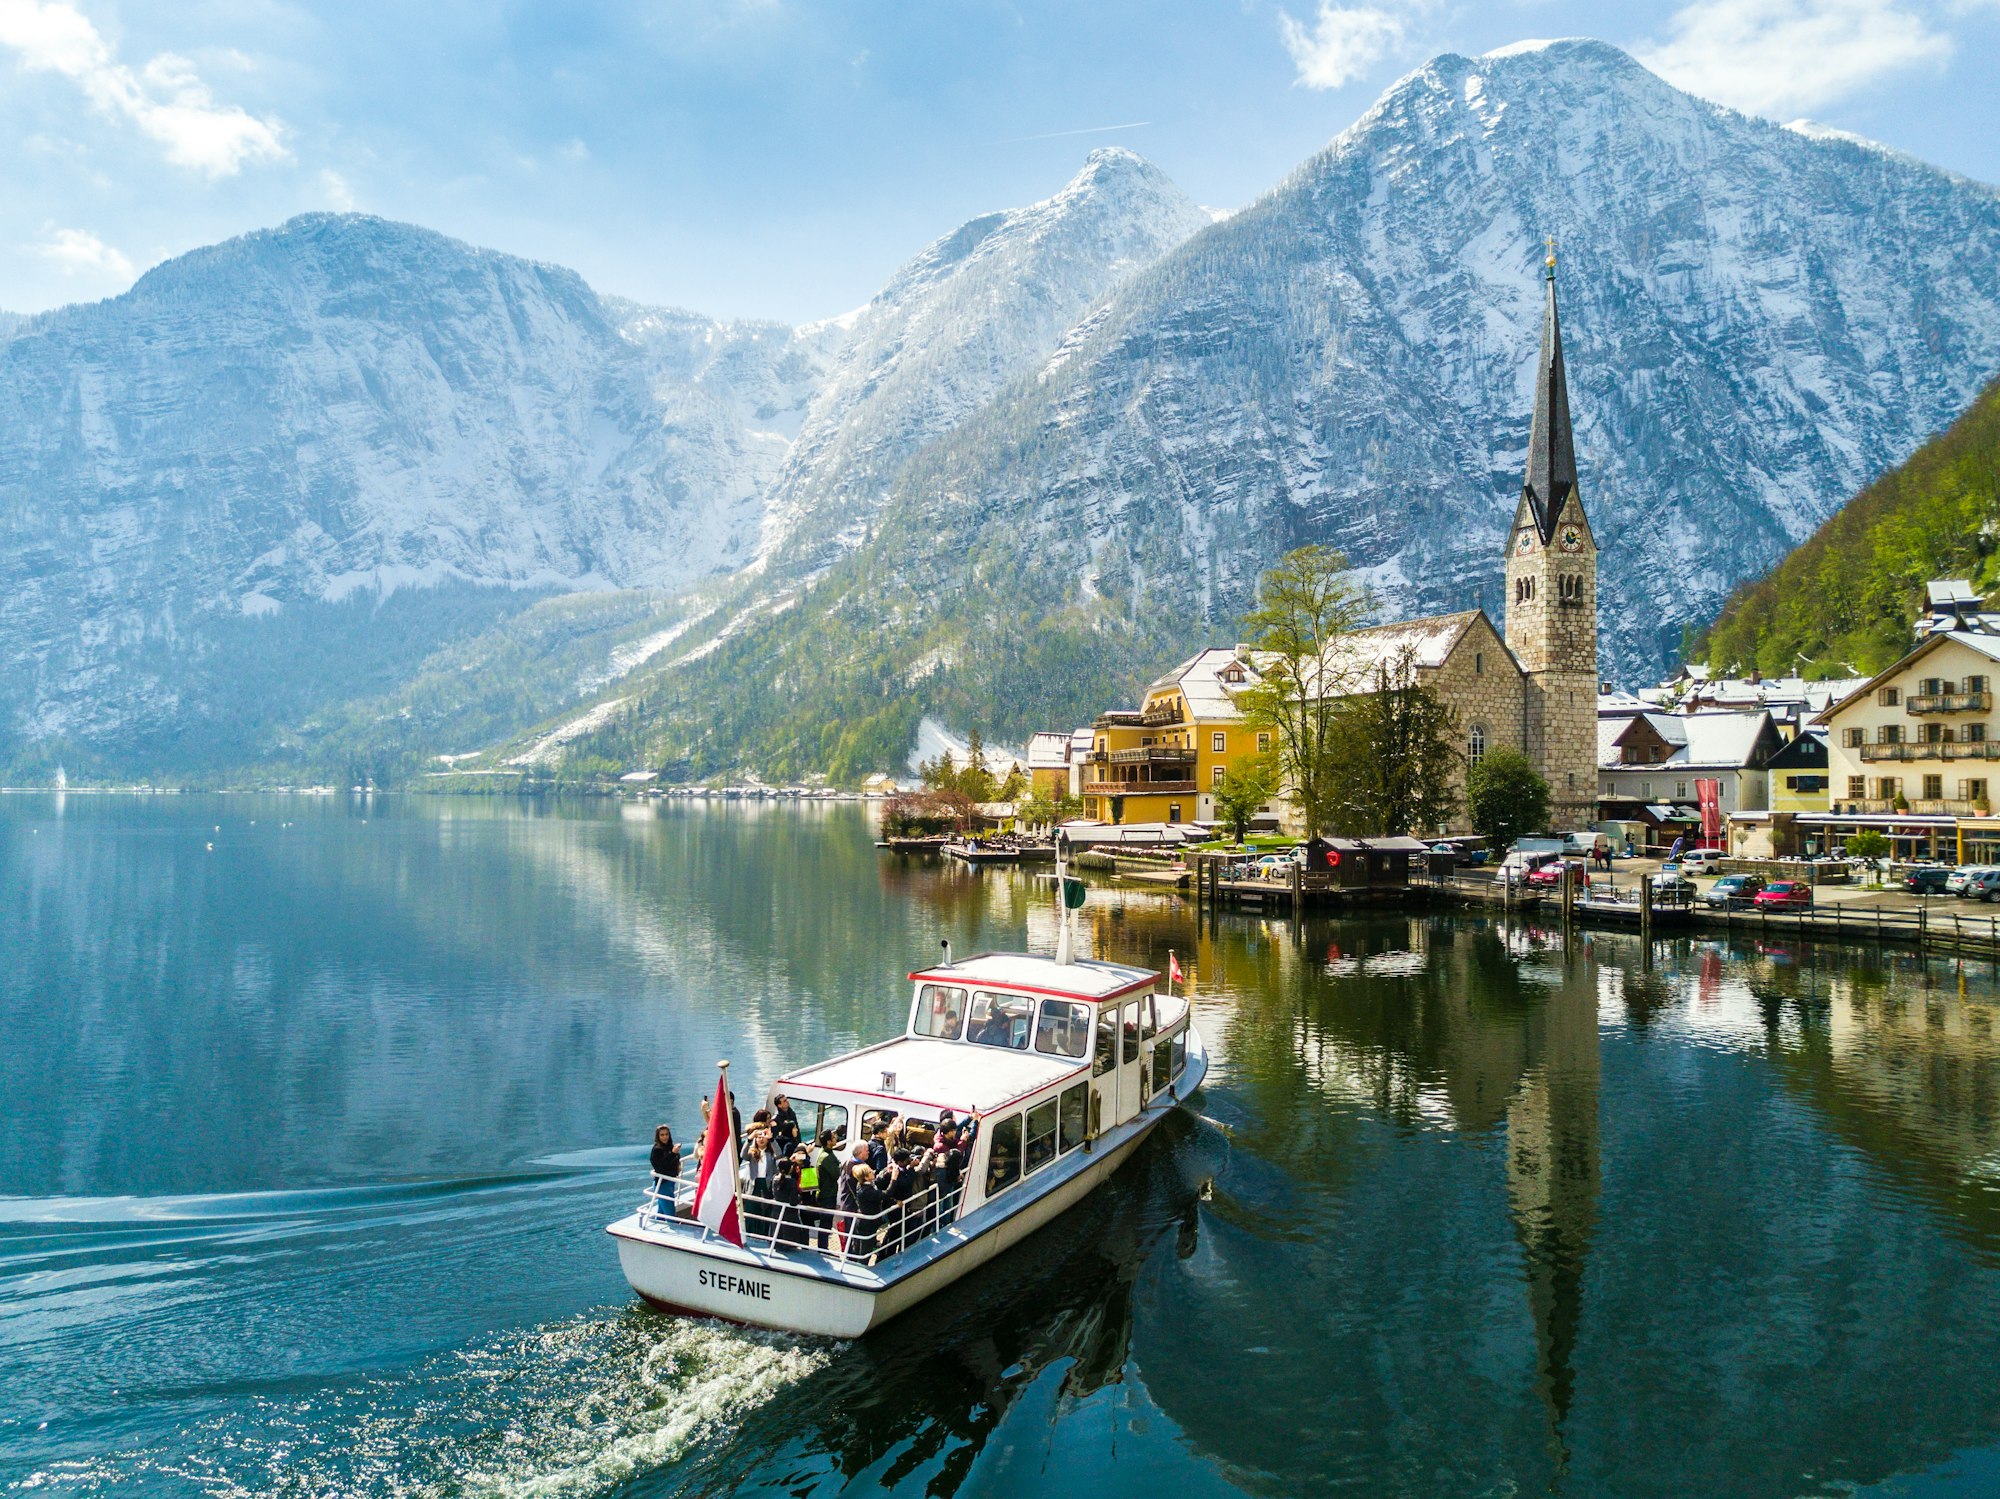 I was going to Hallstatt, known as one of the most beautiful cities in the world. When I got this view, I knew everything was true.